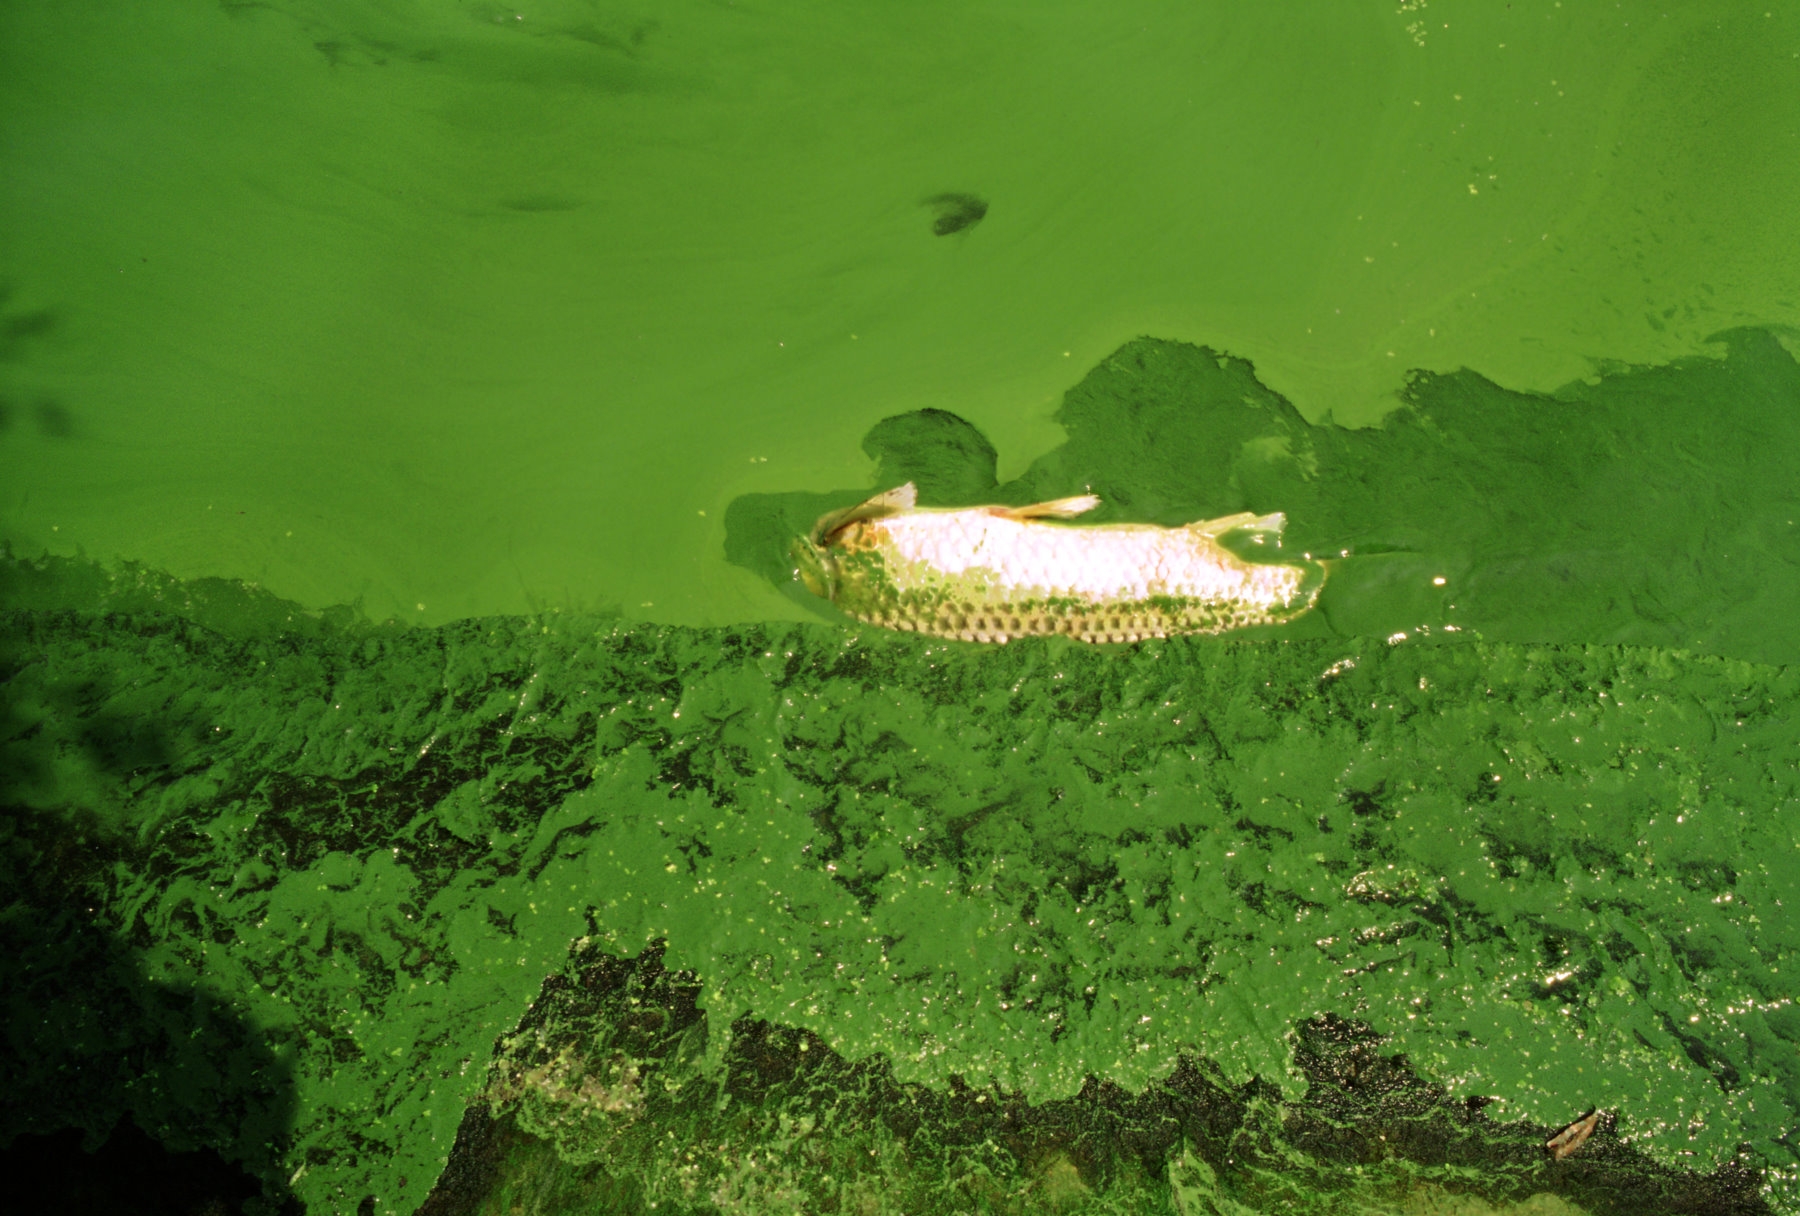 A lake totally covered in bright green algae. A dead fish floats on the surface.